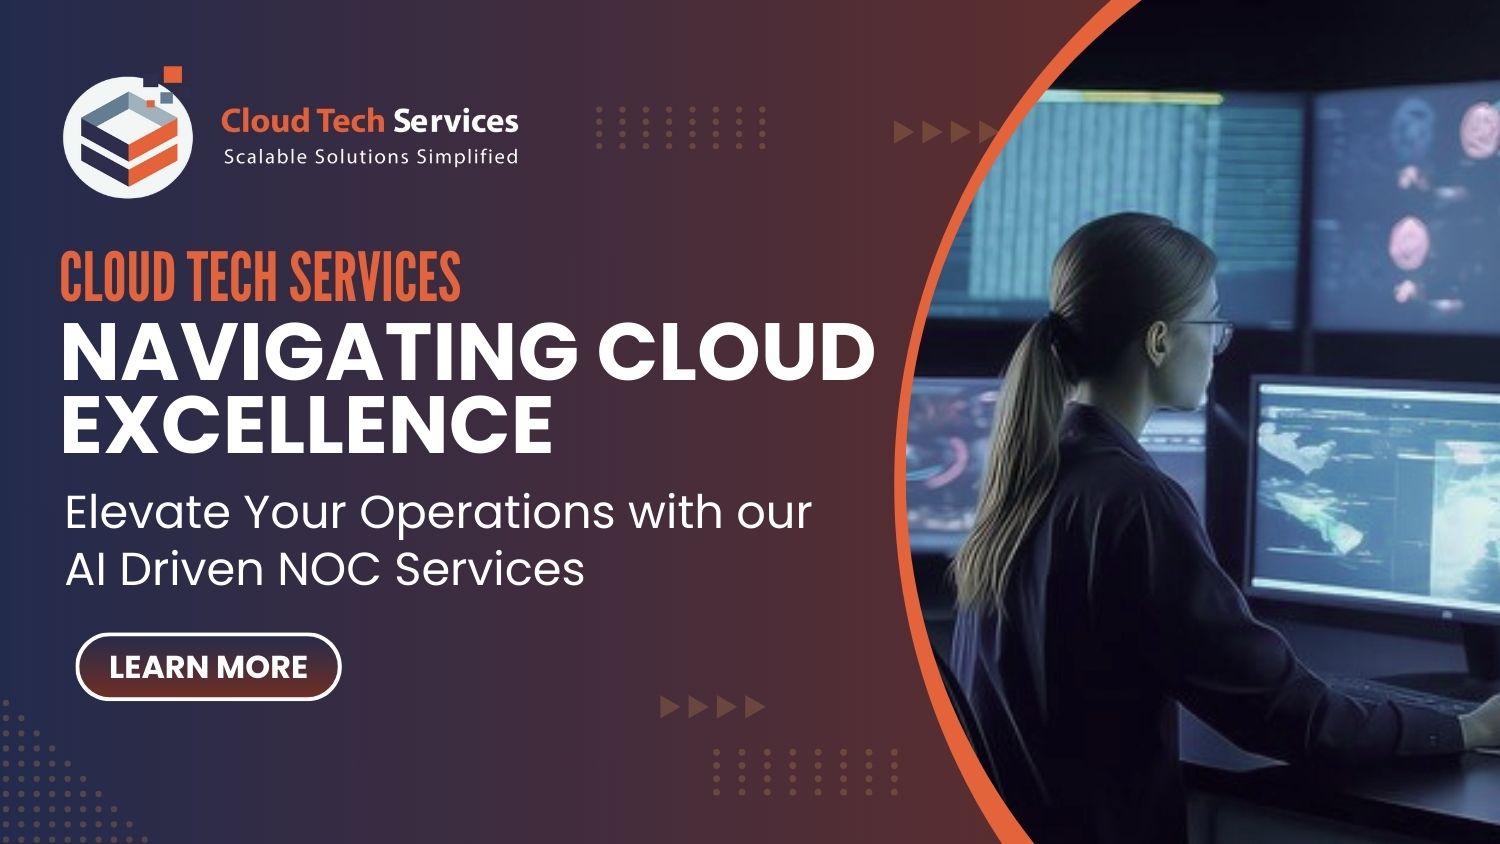 Elevate Your Operations with our AI Driven NOC Services